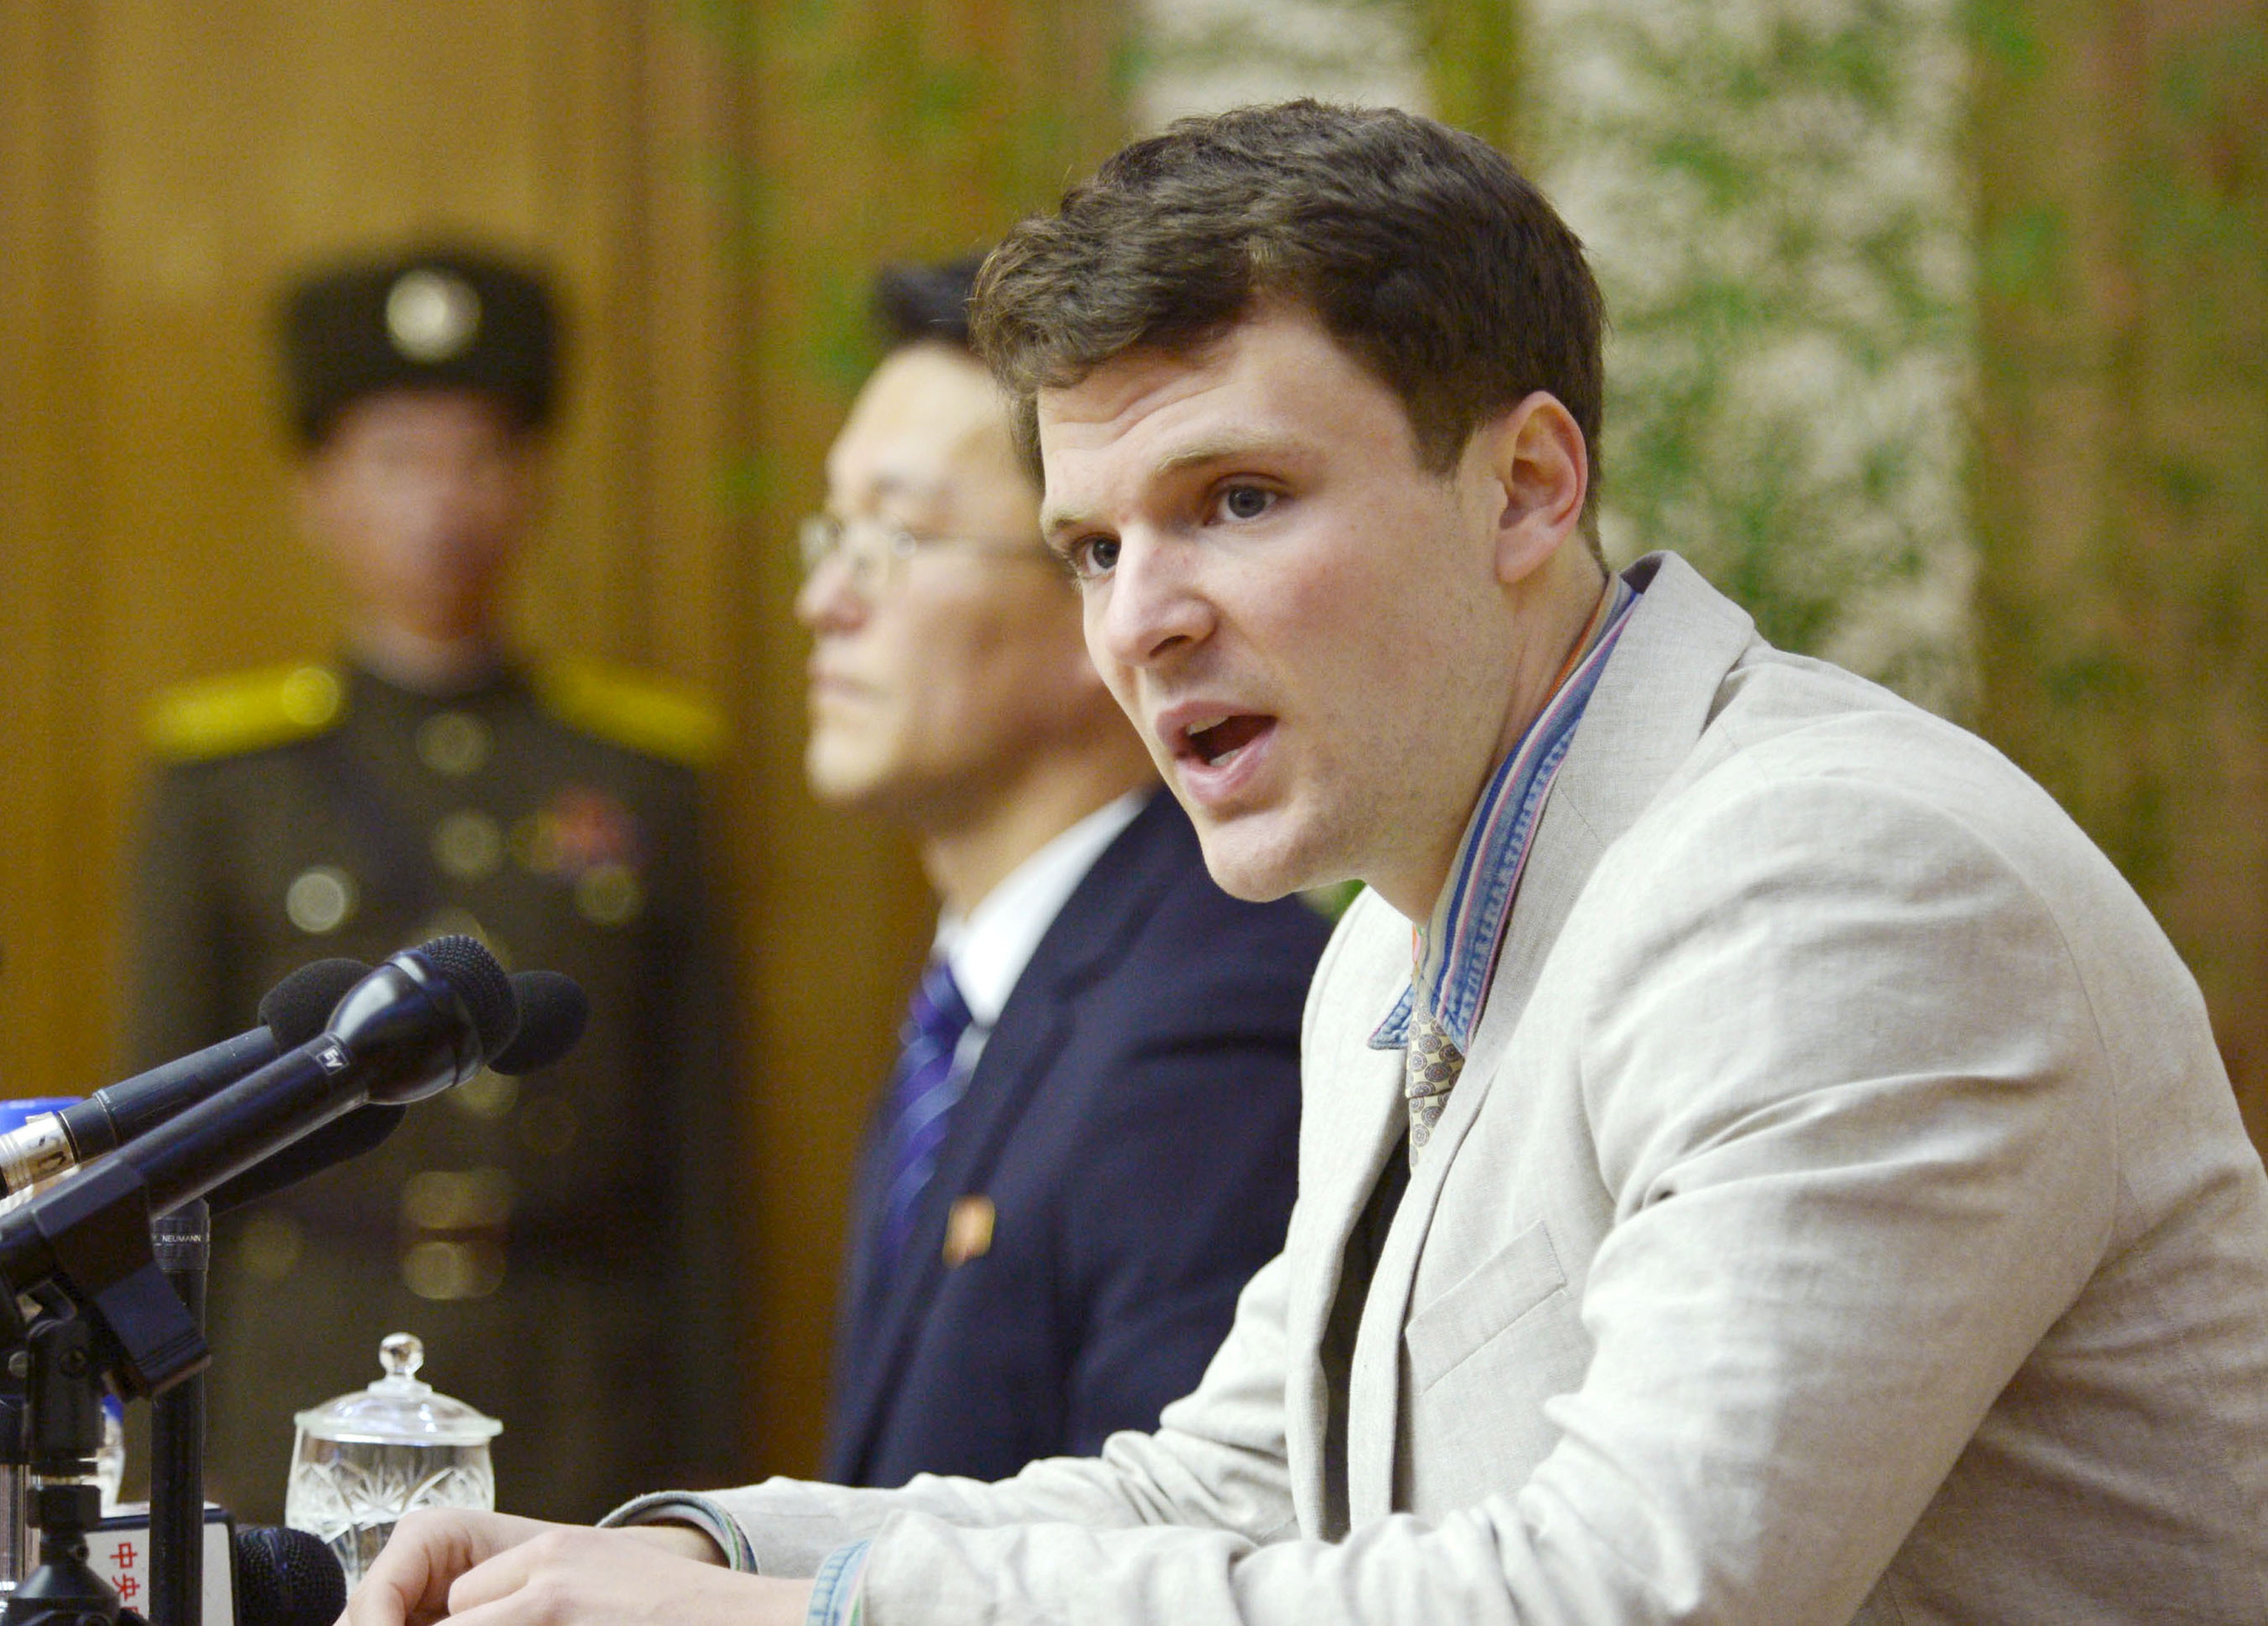 Ottow Warmbier is pictured here in North Korea 